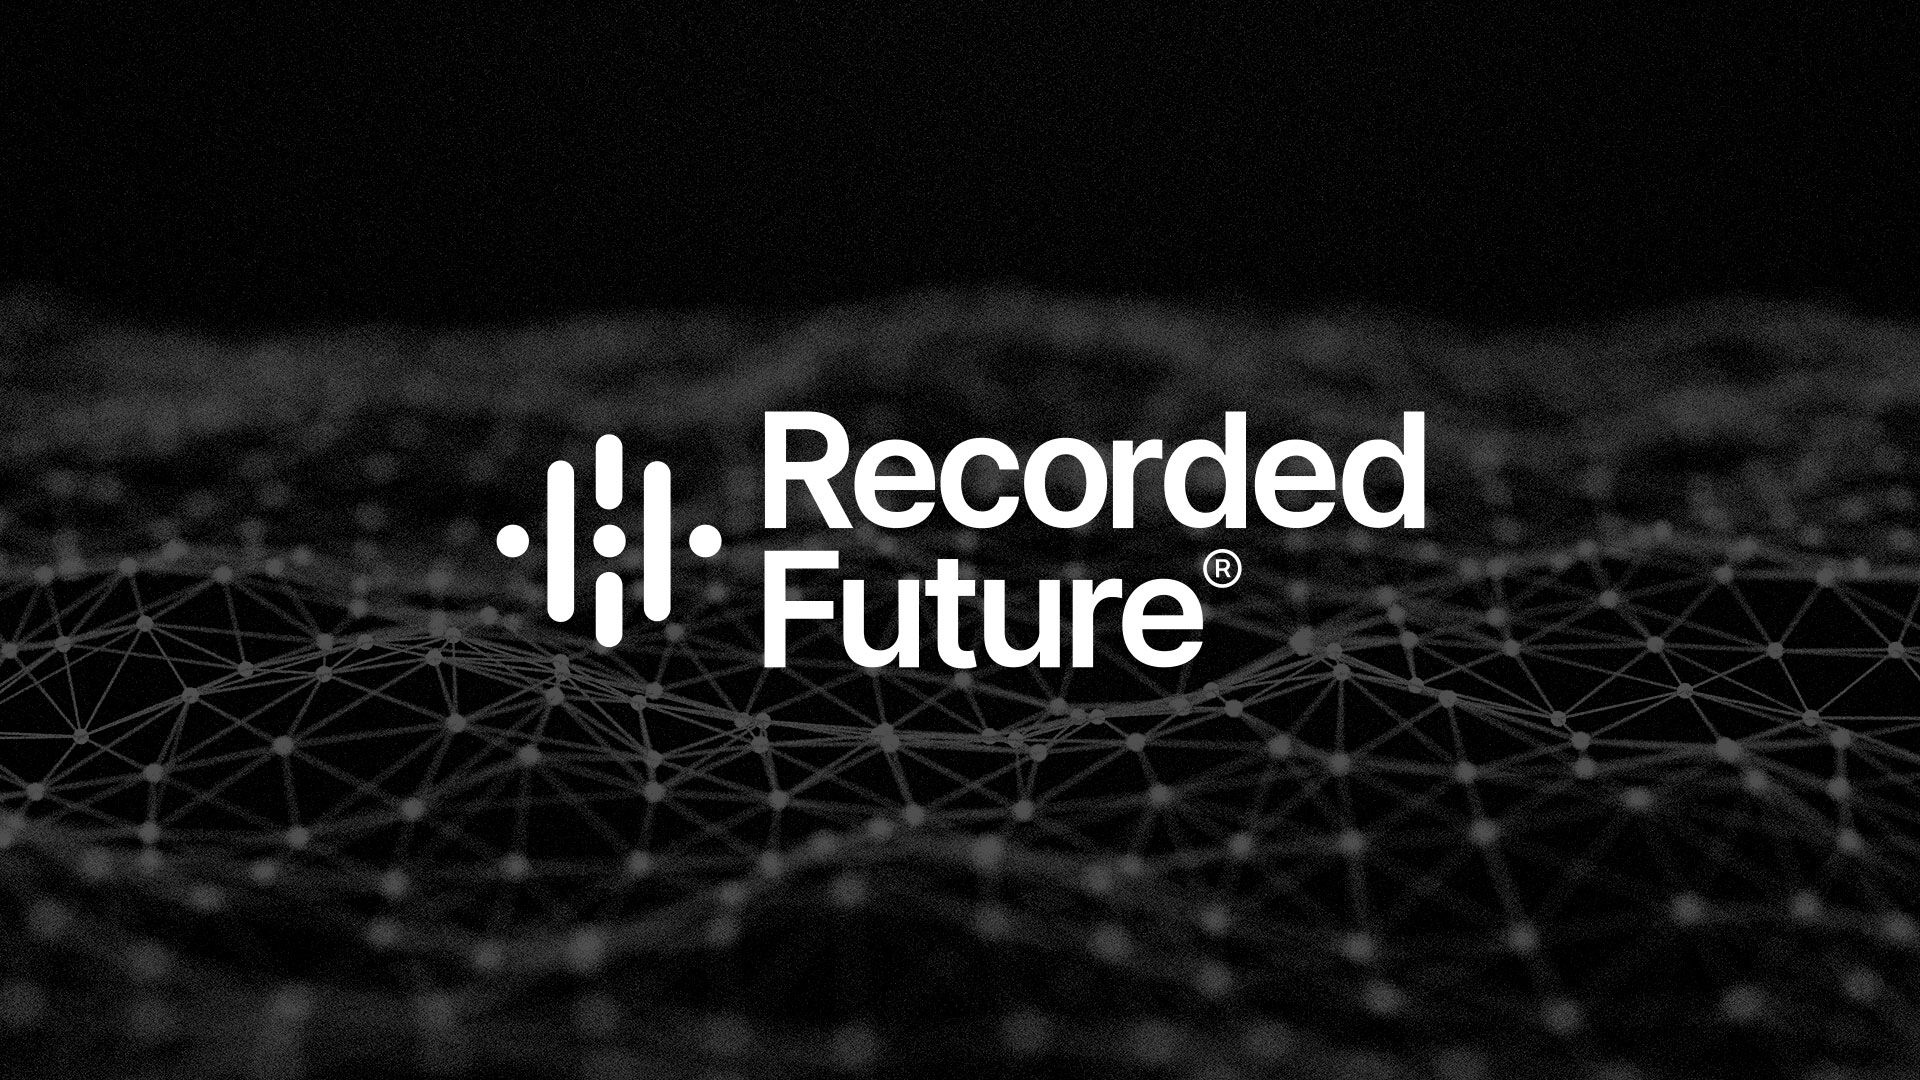 Recorded Future Launches News Site to Tell the Untold Stories of Cyber Intelligence